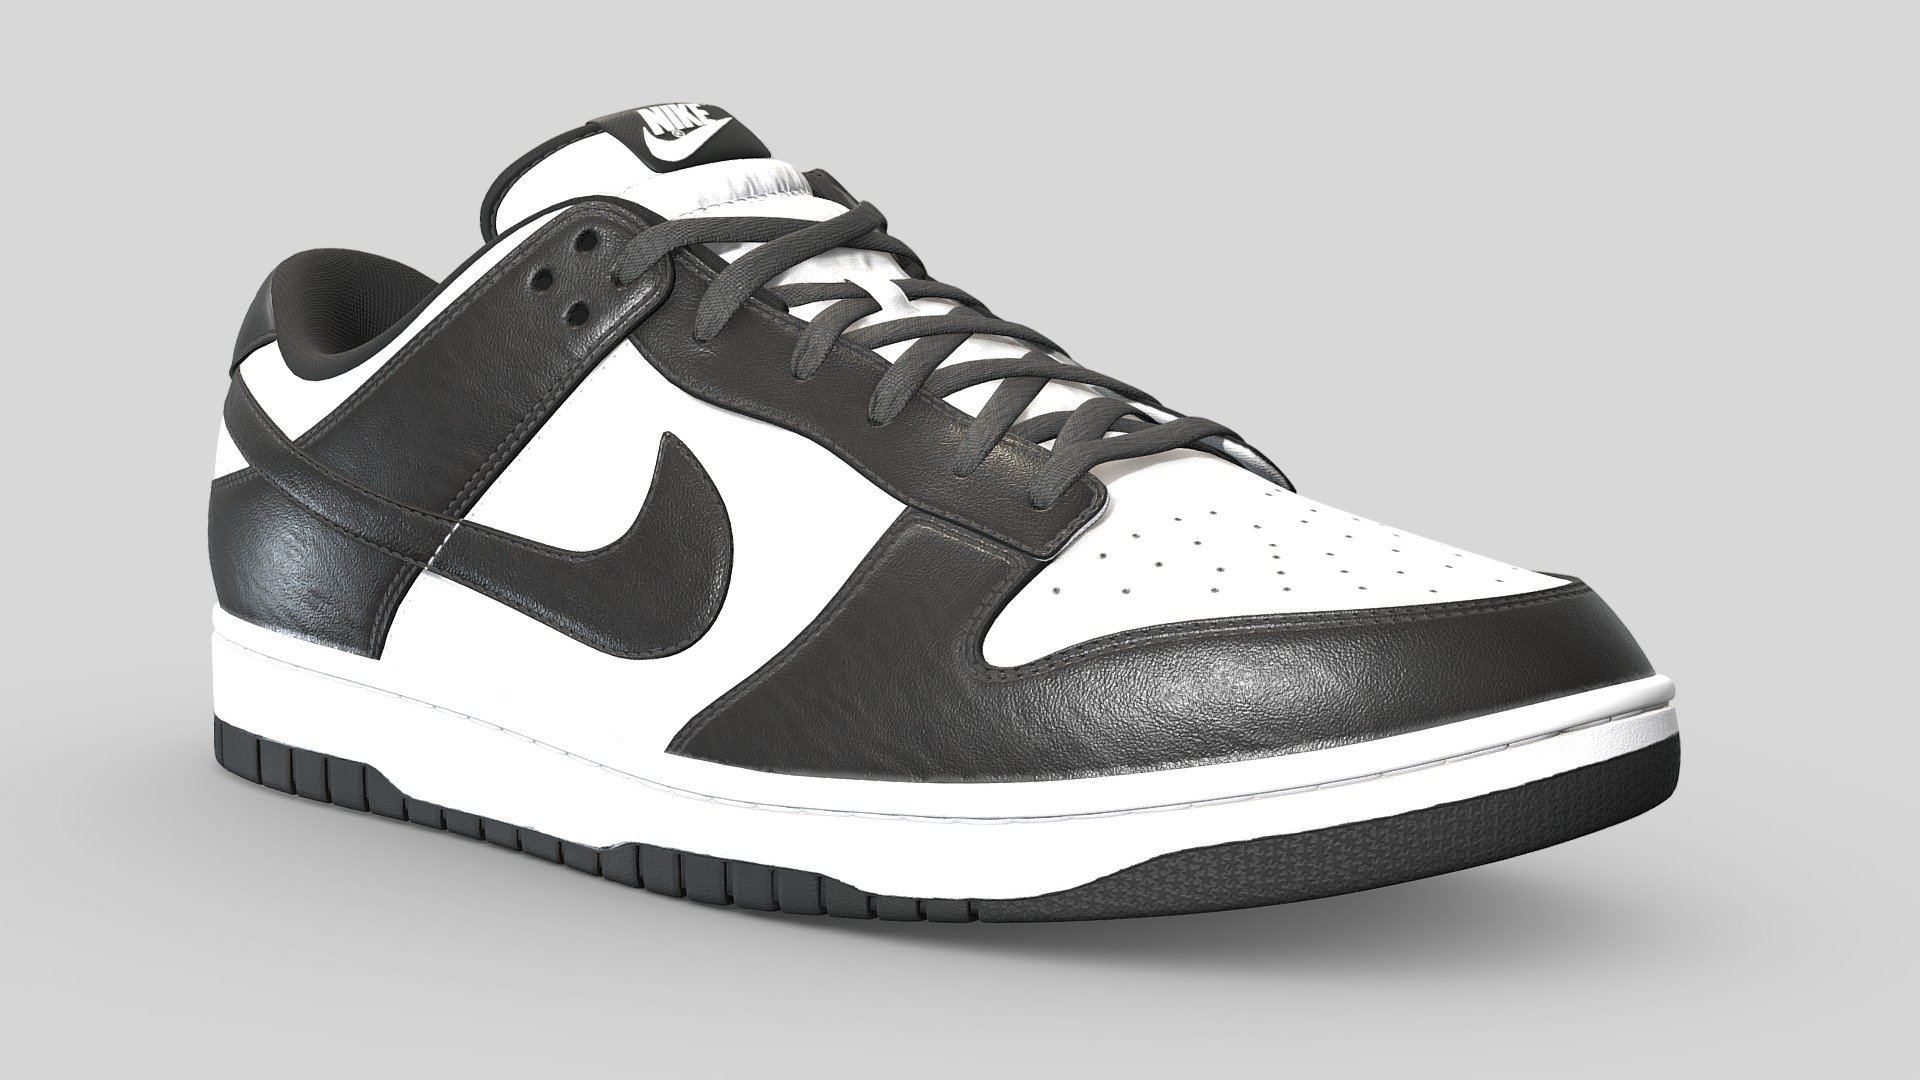 Nike Dunk Low in the Panda Colourway. Every detail was made in the recreation of this shoe, from the text on the medial side of the shoe to the subtlety of each material, nothing went overlooked. Stitches were sculpted by hand to achieve the highest quality

What's included




Blender file with linked textures

FBX and OBJ versions

OneMesh version

All 4k textures

Model Features

The upmost care went into crafting this model. As a result it is subdivision ready. The model was unwrapped with efficiency in mind. Both left and right shoes are mostly identical, save for logos and text that cannot be mirrored. As such the high detail version of the shoe uses 4 UV maps to cover both of the shoes, with the One mesh version using just the one UV map 3d model